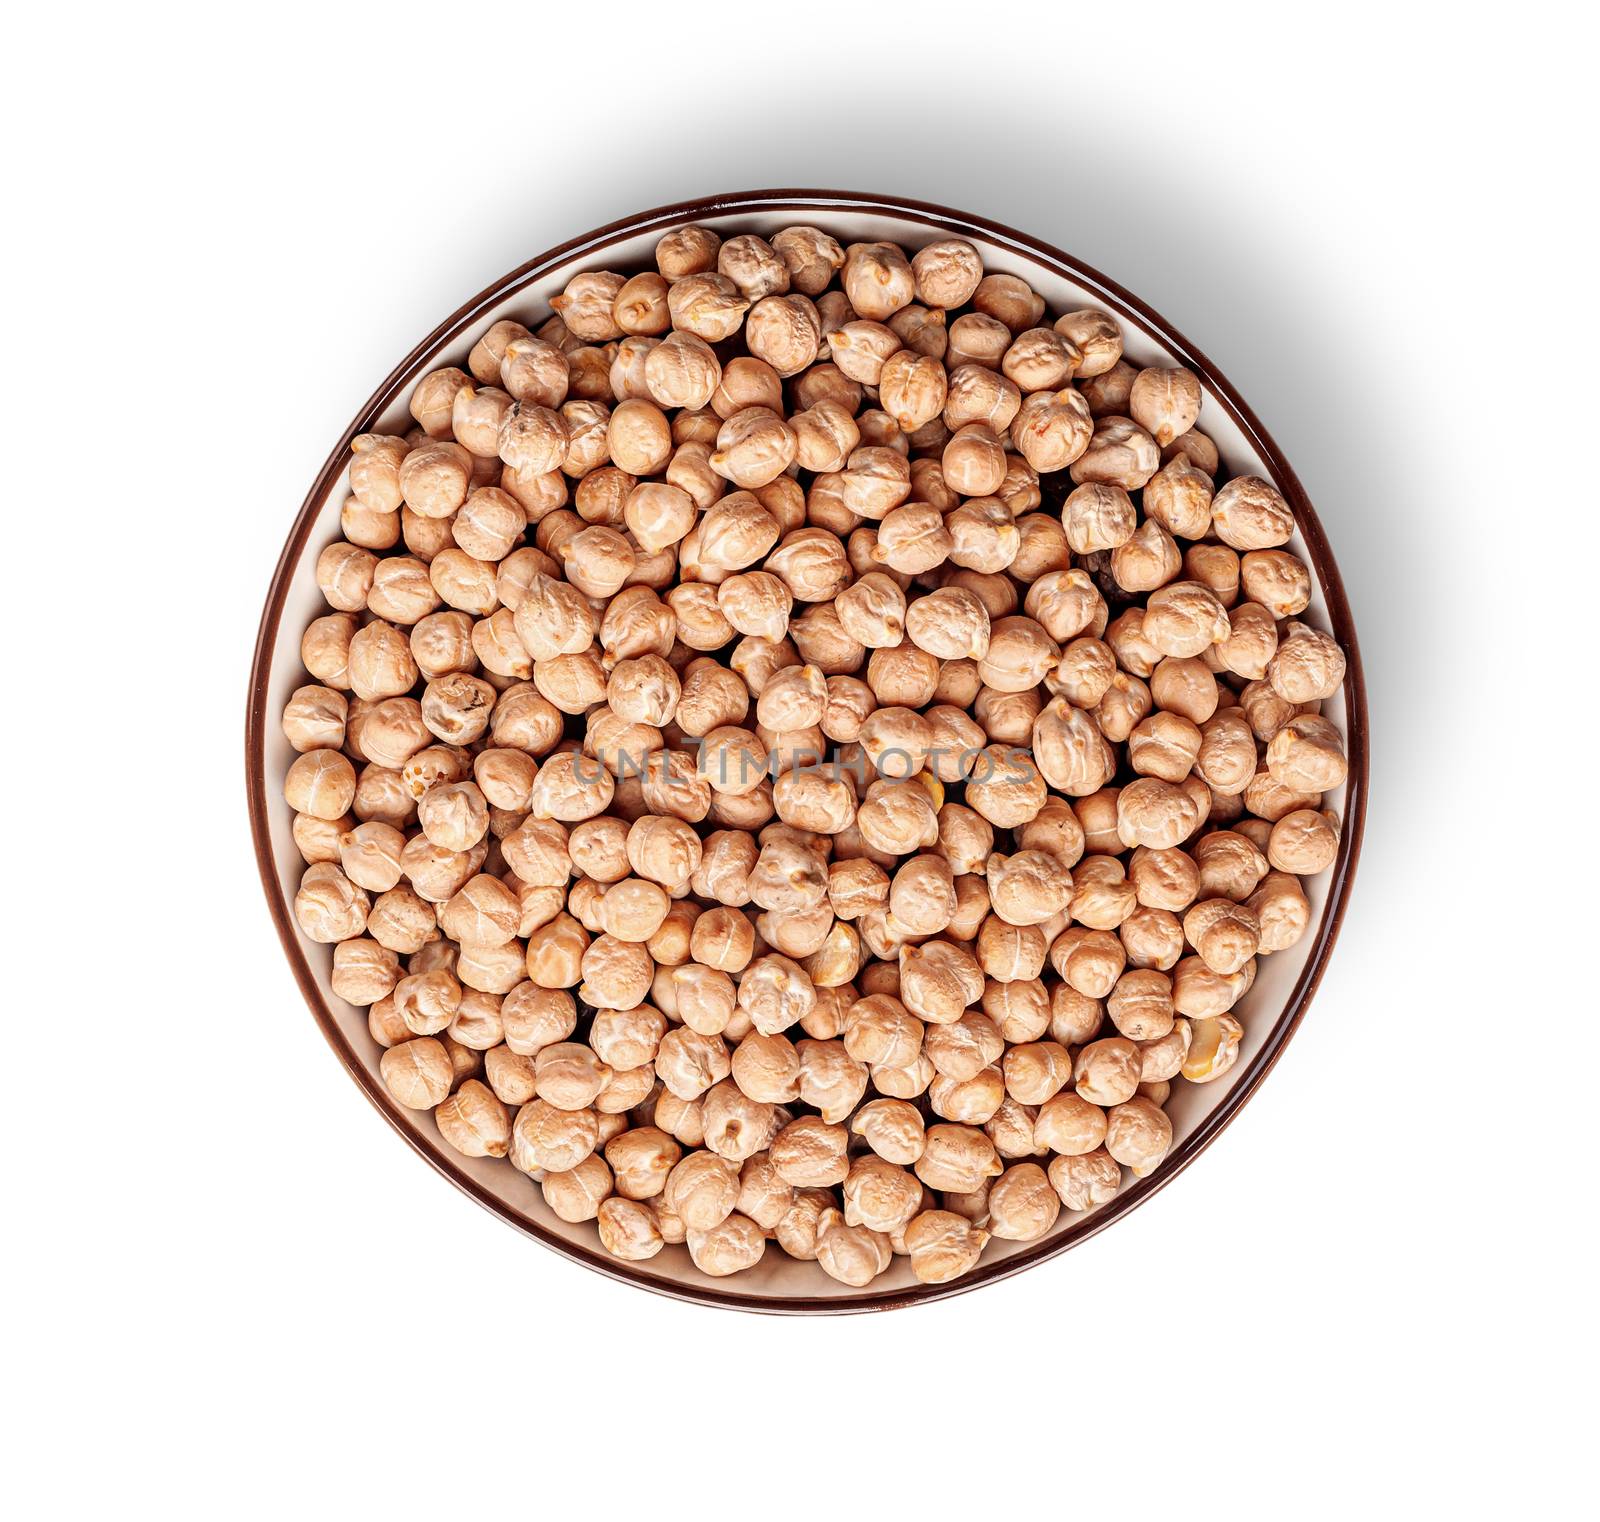 Chickpeas in a bowl top view isolated on white background